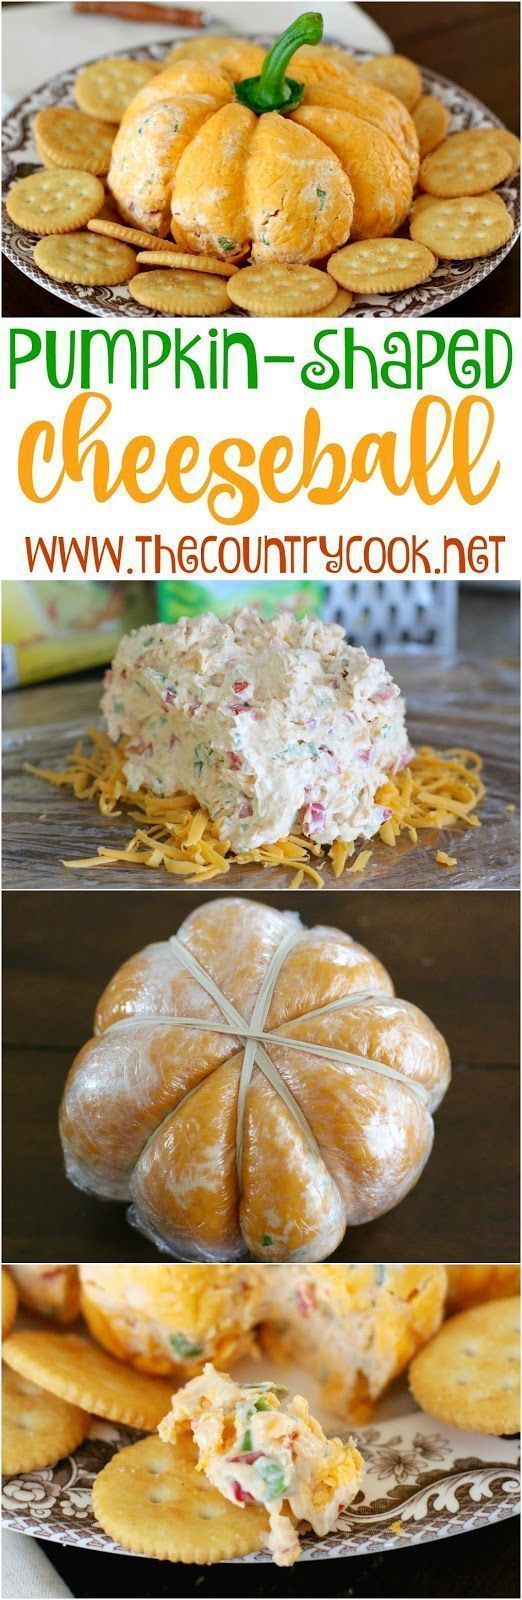 Pumpkin-Shaped Cheese Ball Thanksgiving Appetizer Recipe | The Country Cook – The BEST Classic, Improved and Traditional